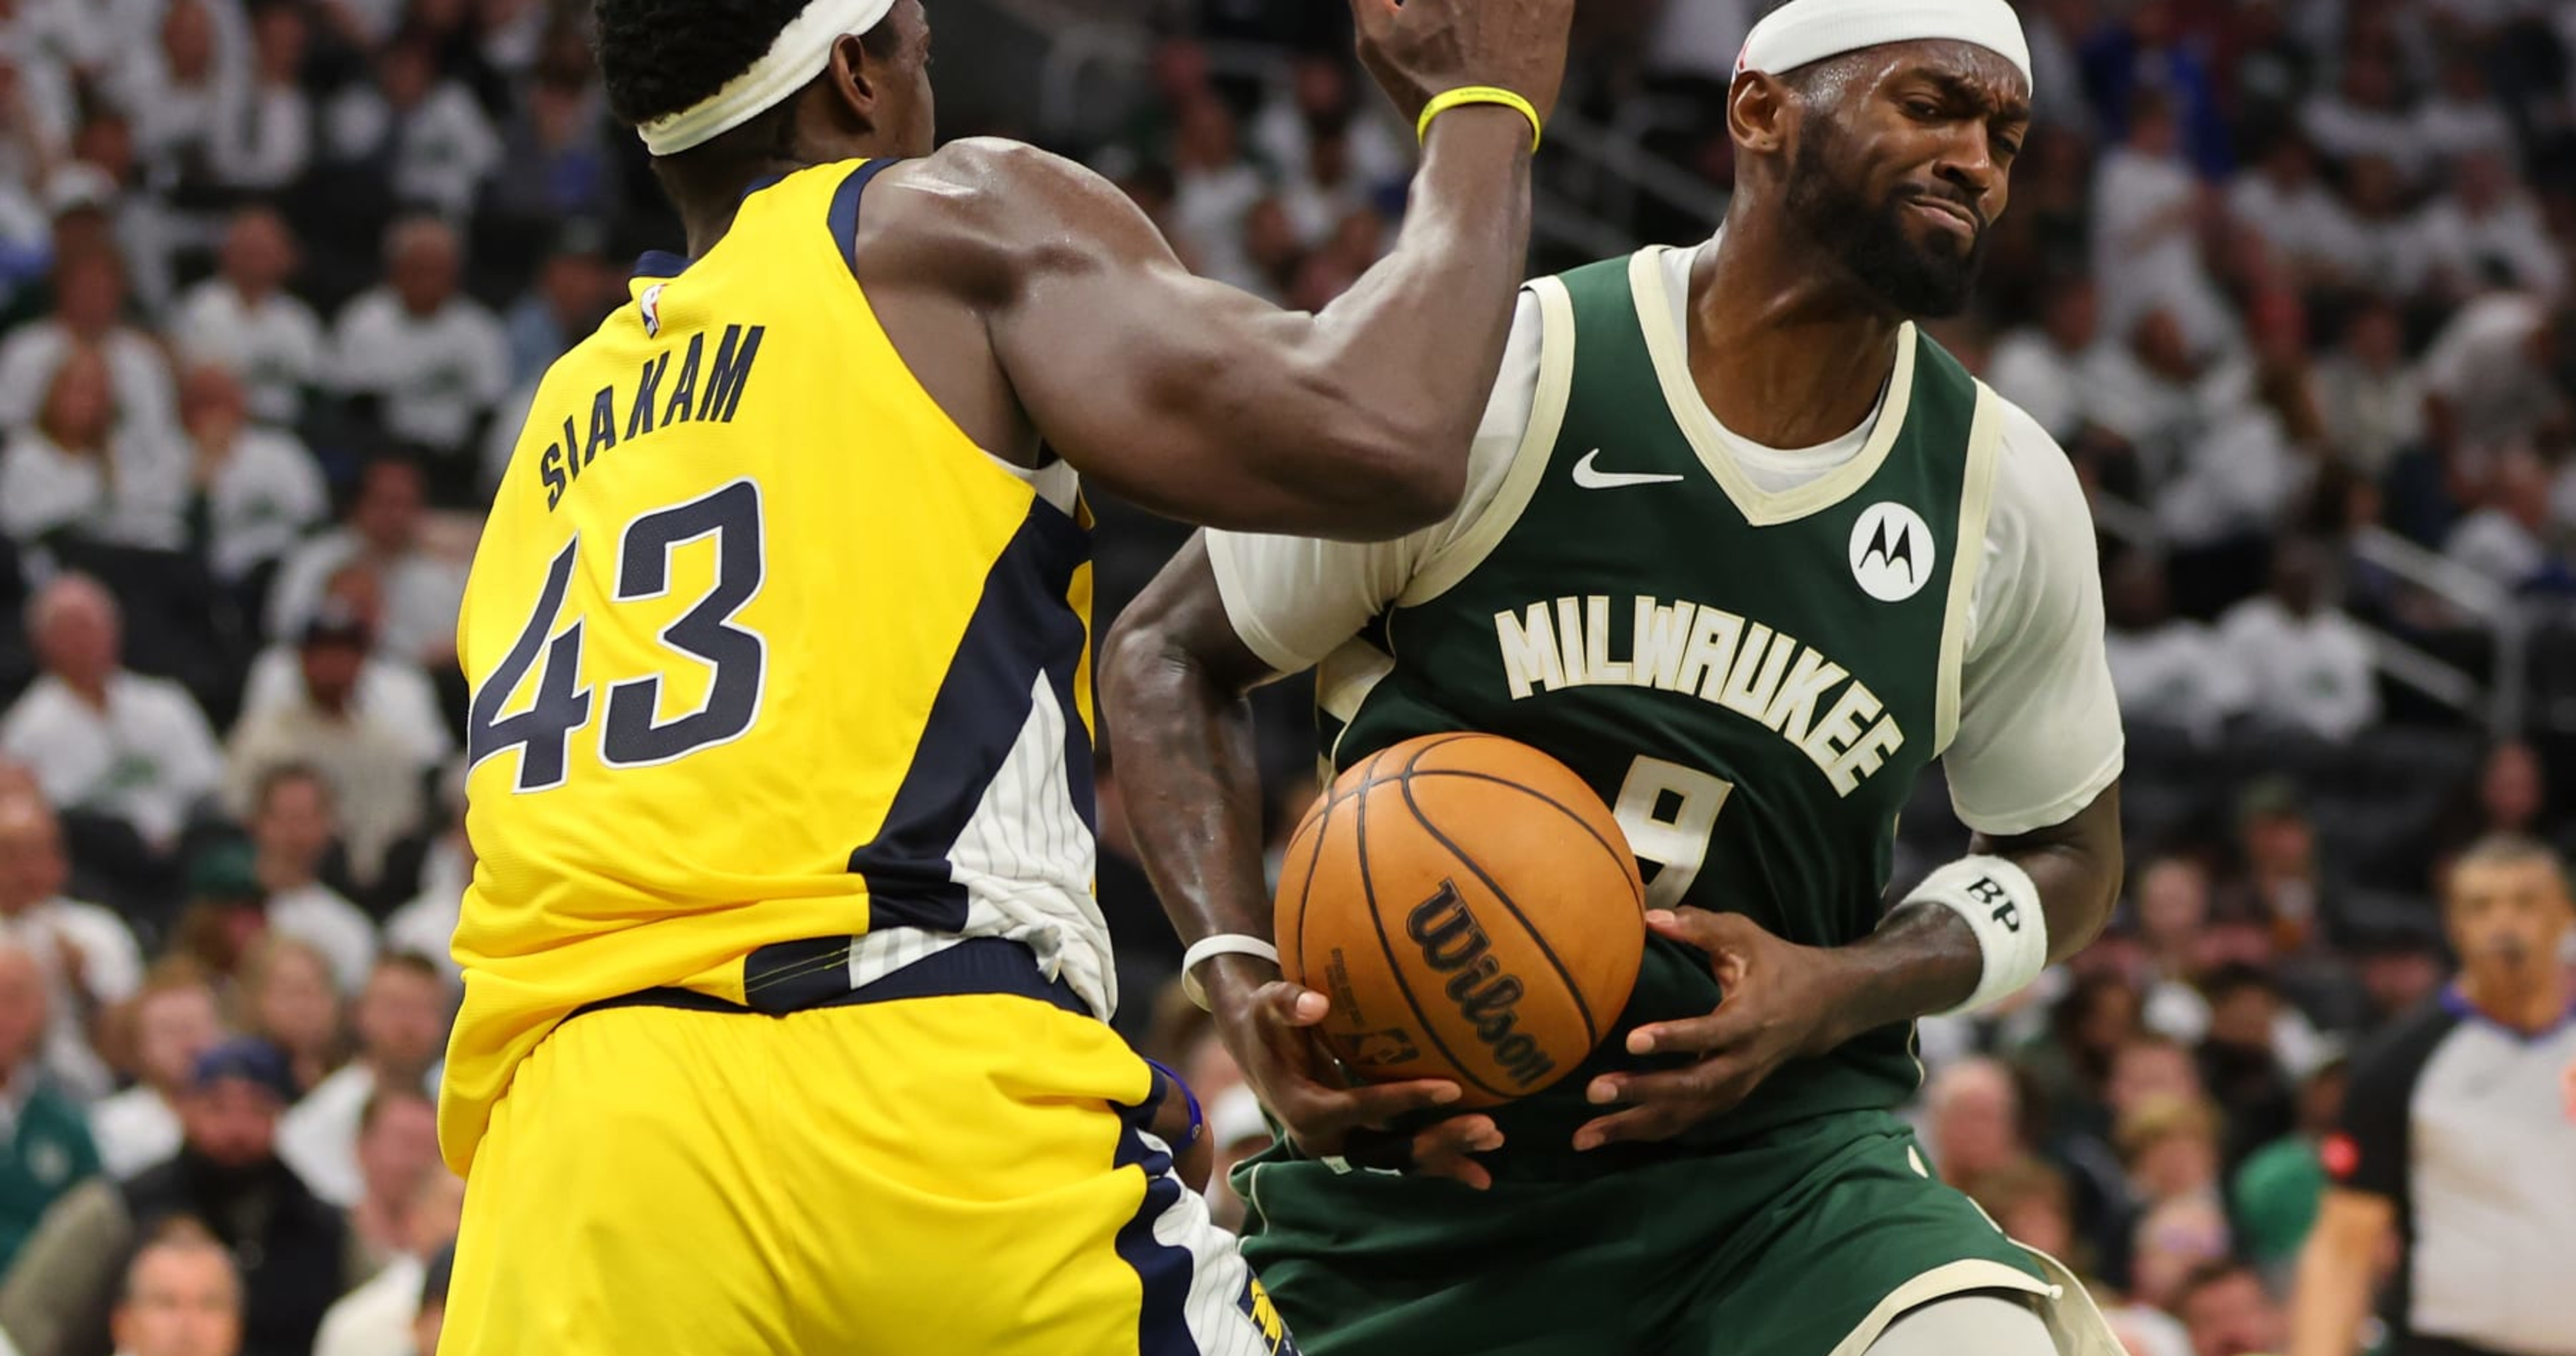 Bucks' Bobby Portis Rips Pacers as 'Frontrunners' for Trash Talk During Game 2 Win